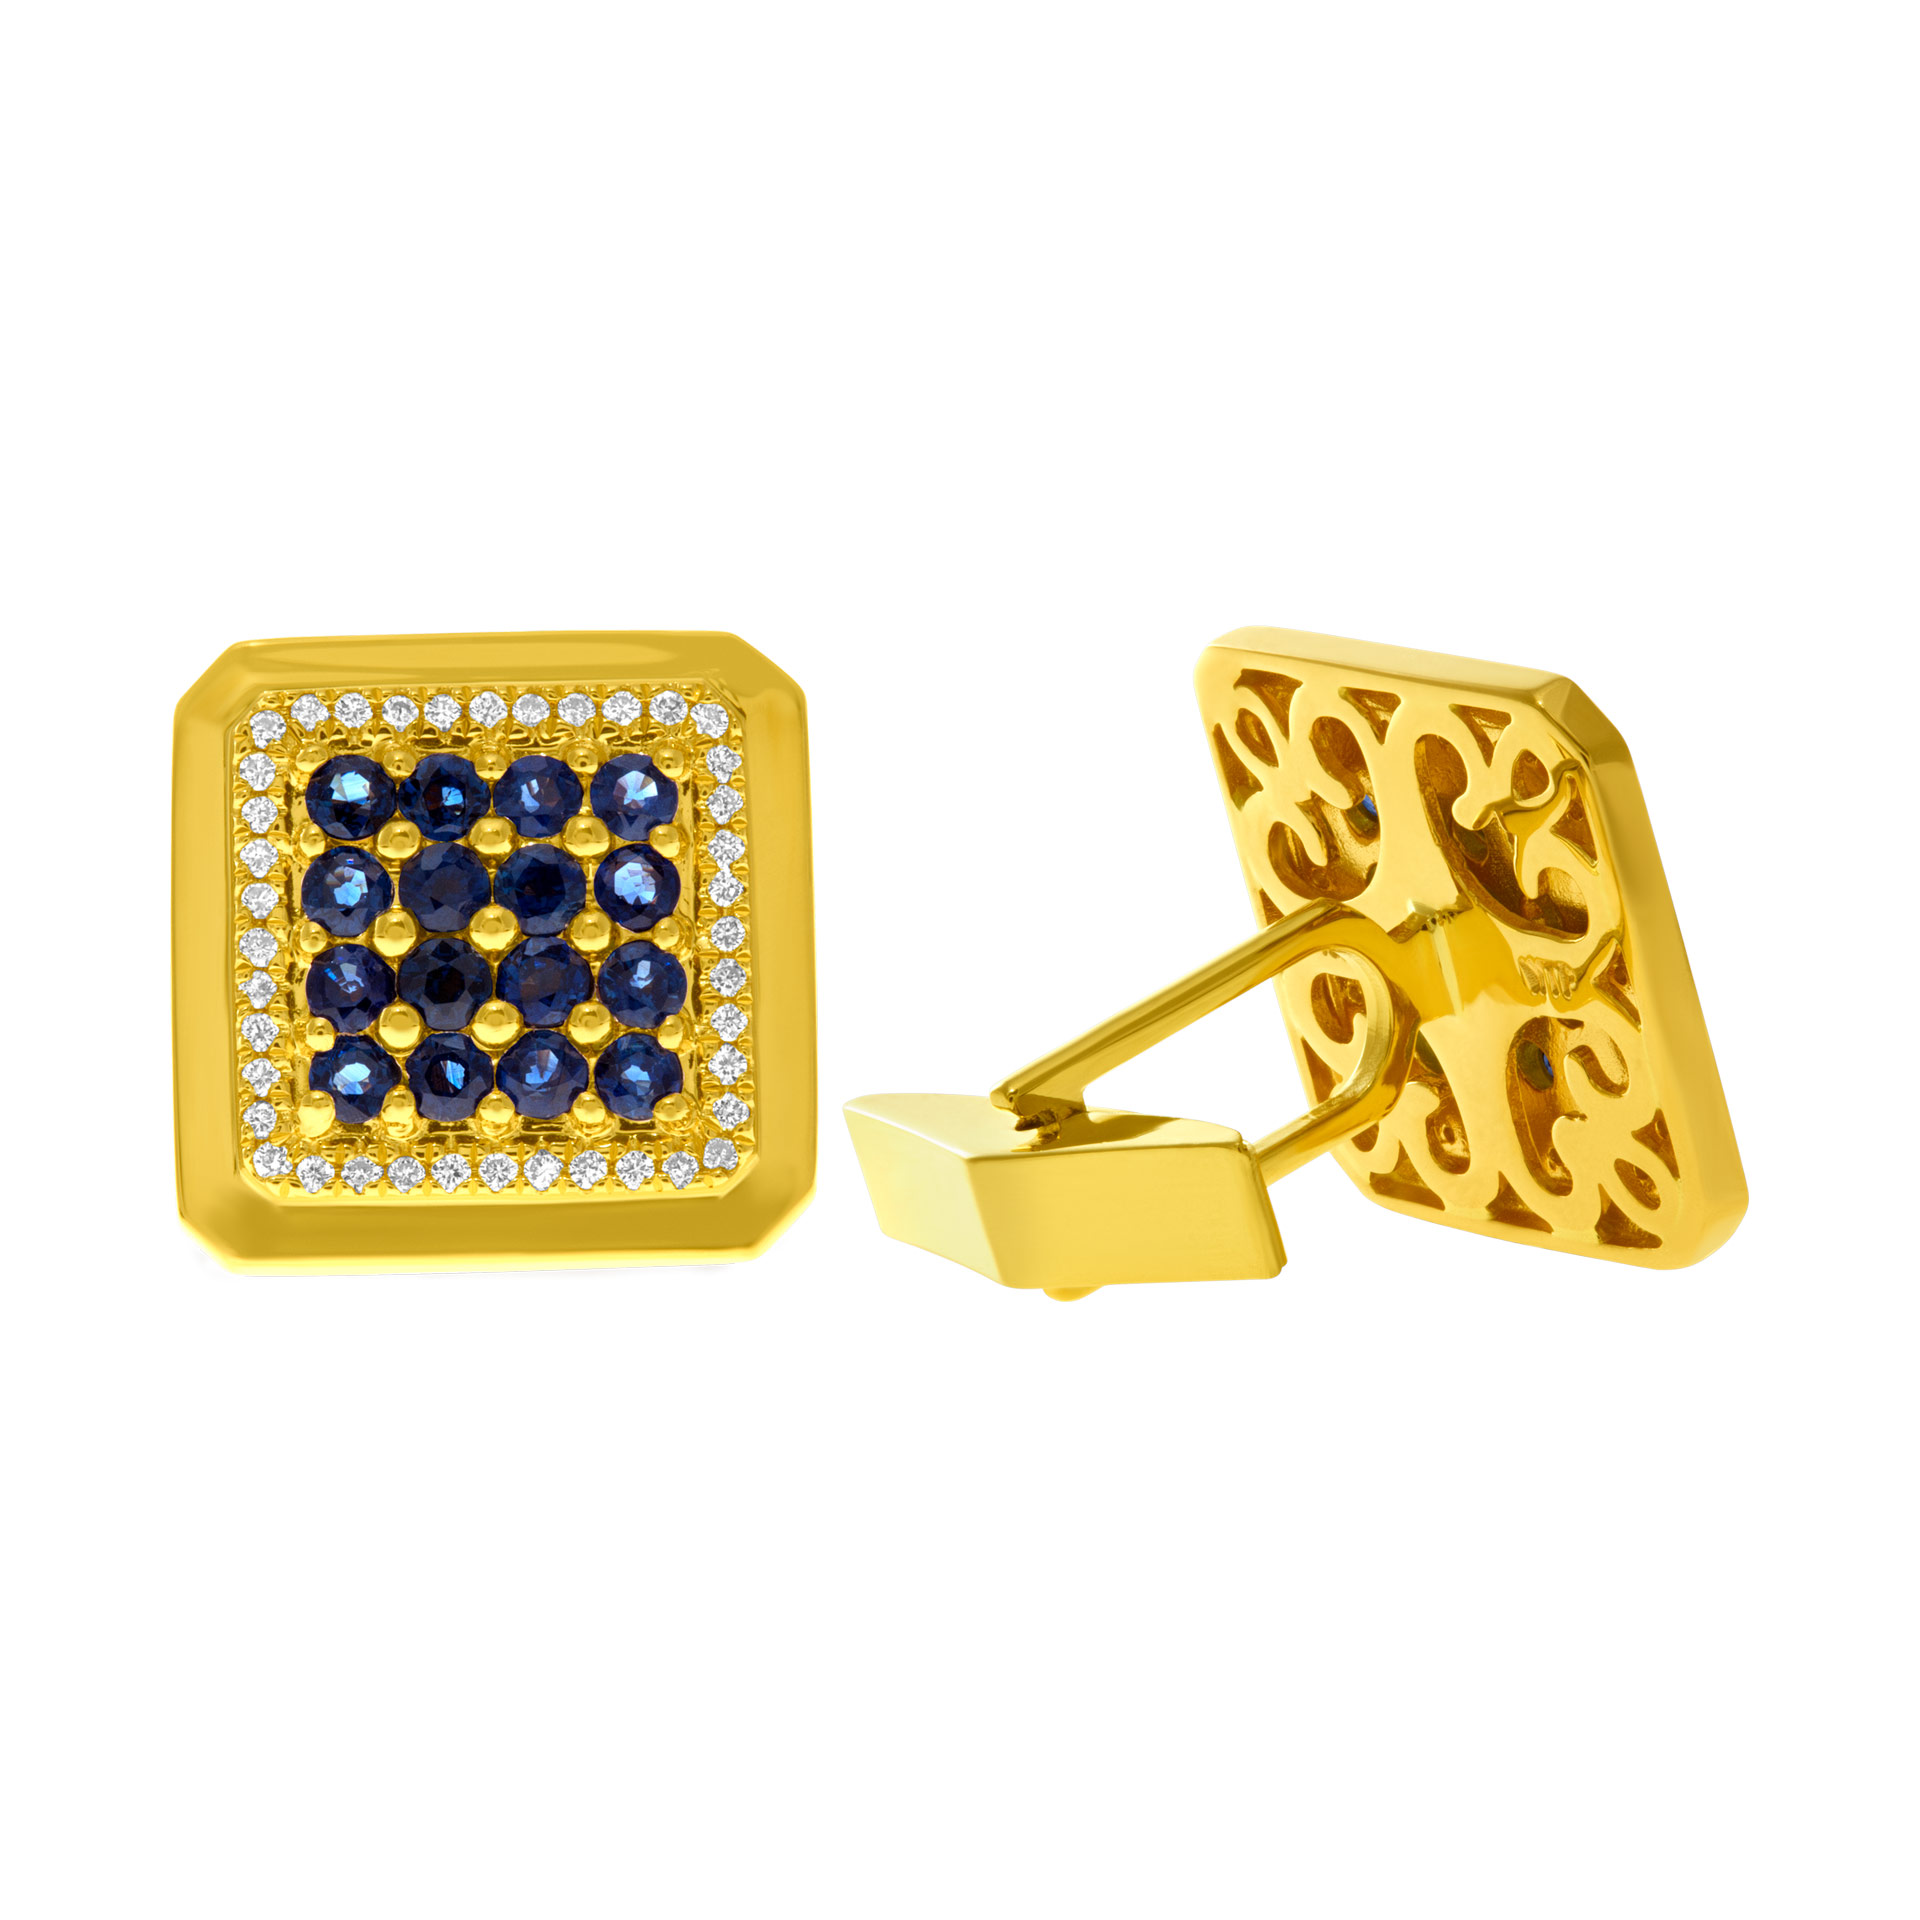 Blue sapphire and diamond cufflinks in 18k yellow gold.  3.20 carats in sapphires